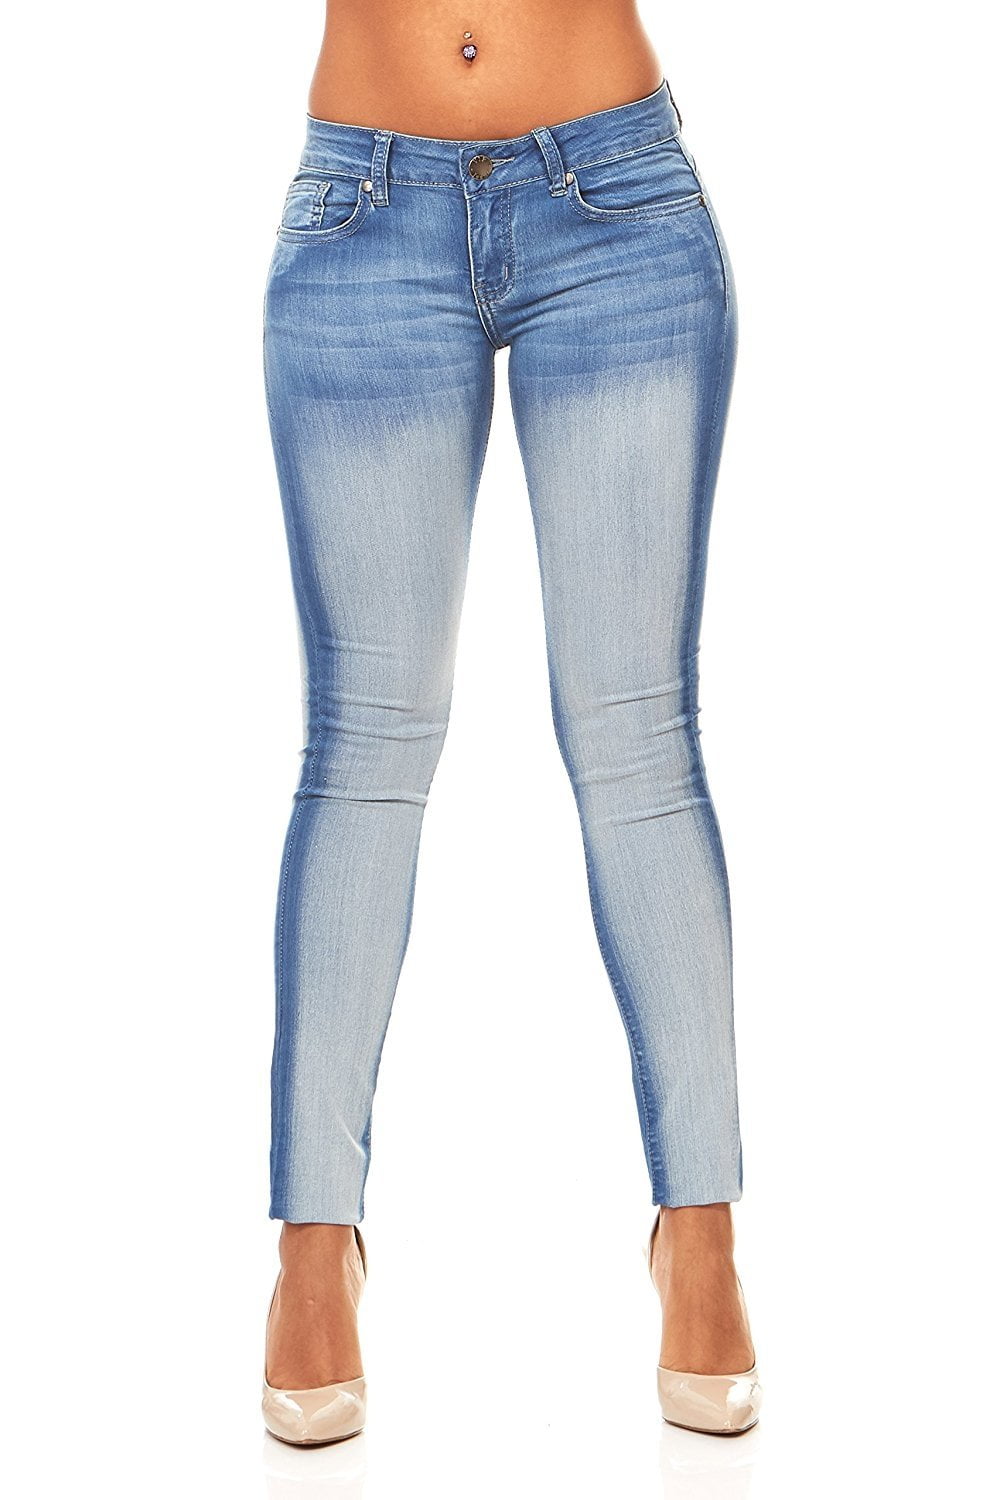 Jeans for Jeans Juniors 7 Women Electric Classic Blue Washed Stone Fit Skinny Sizes Stretch Slim